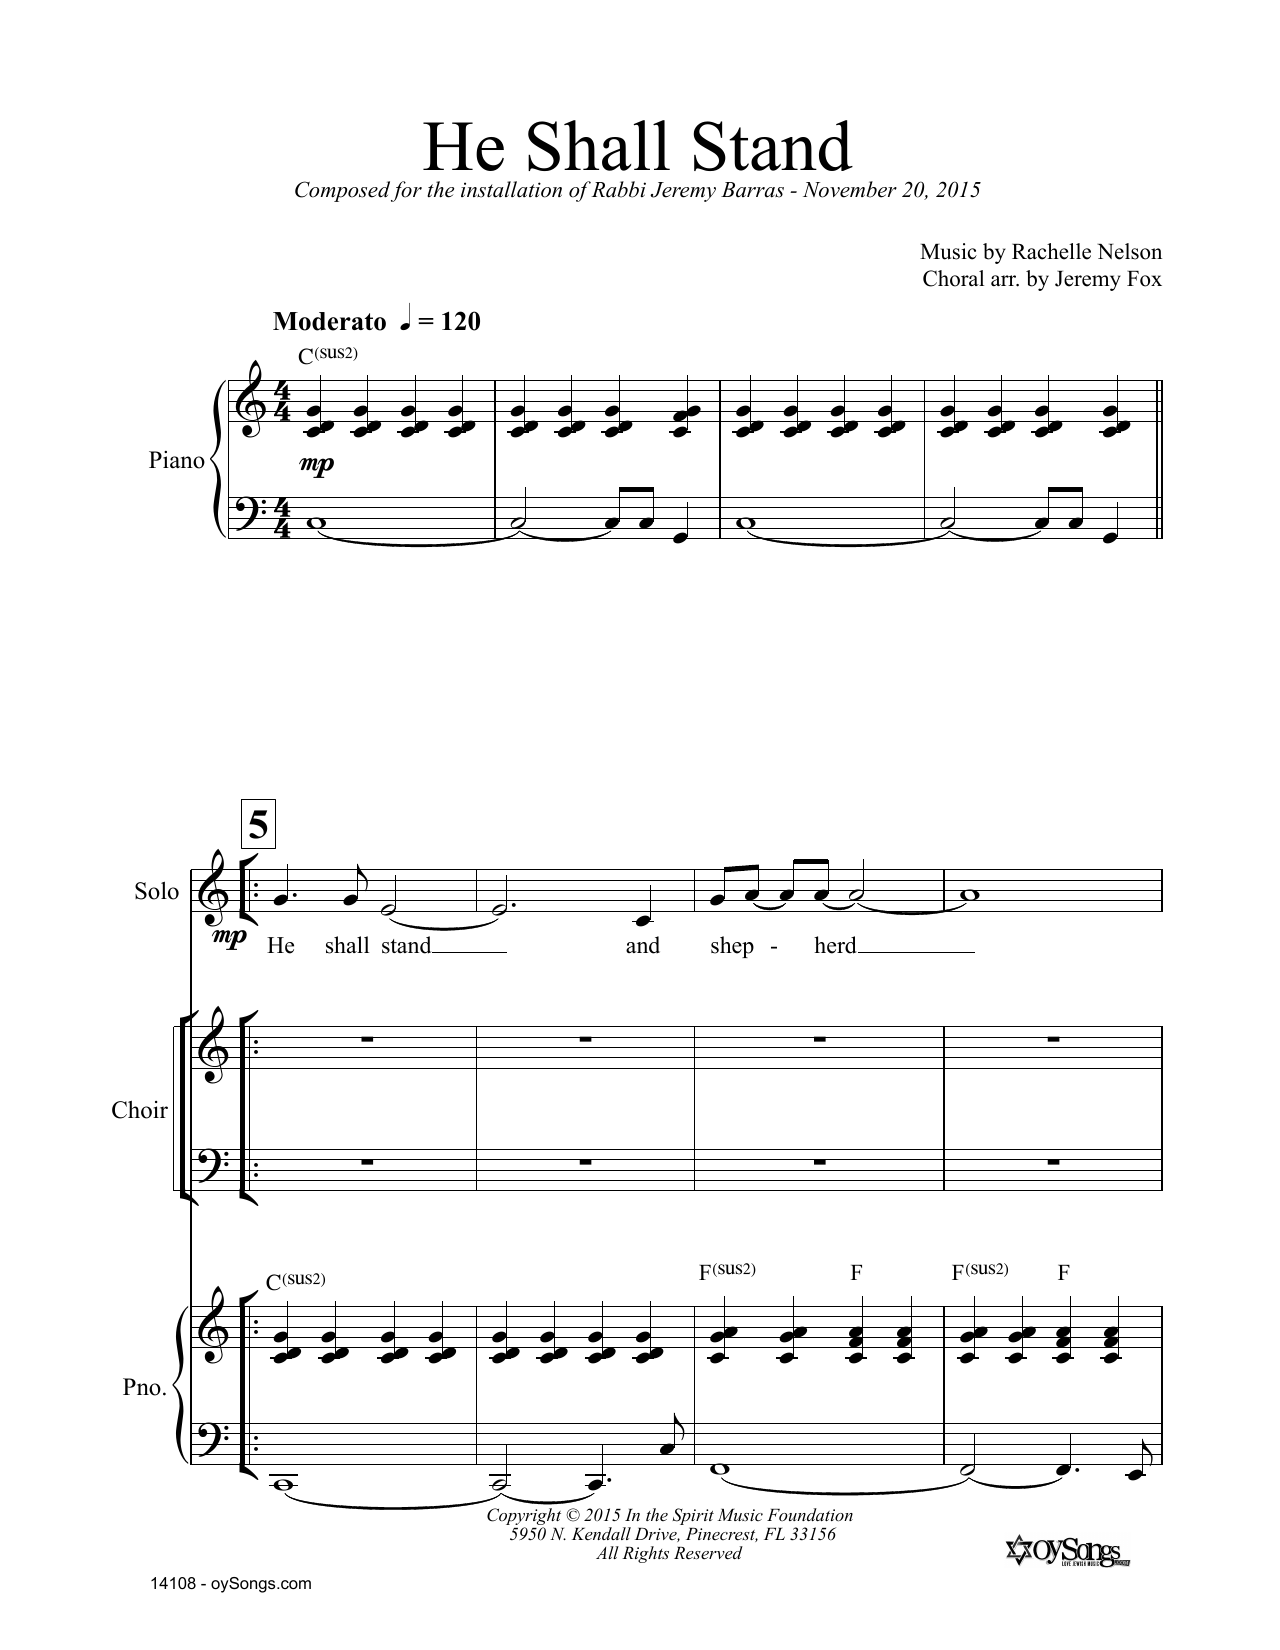 Download Rachelle Nelson He Shall Stand Sheet Music